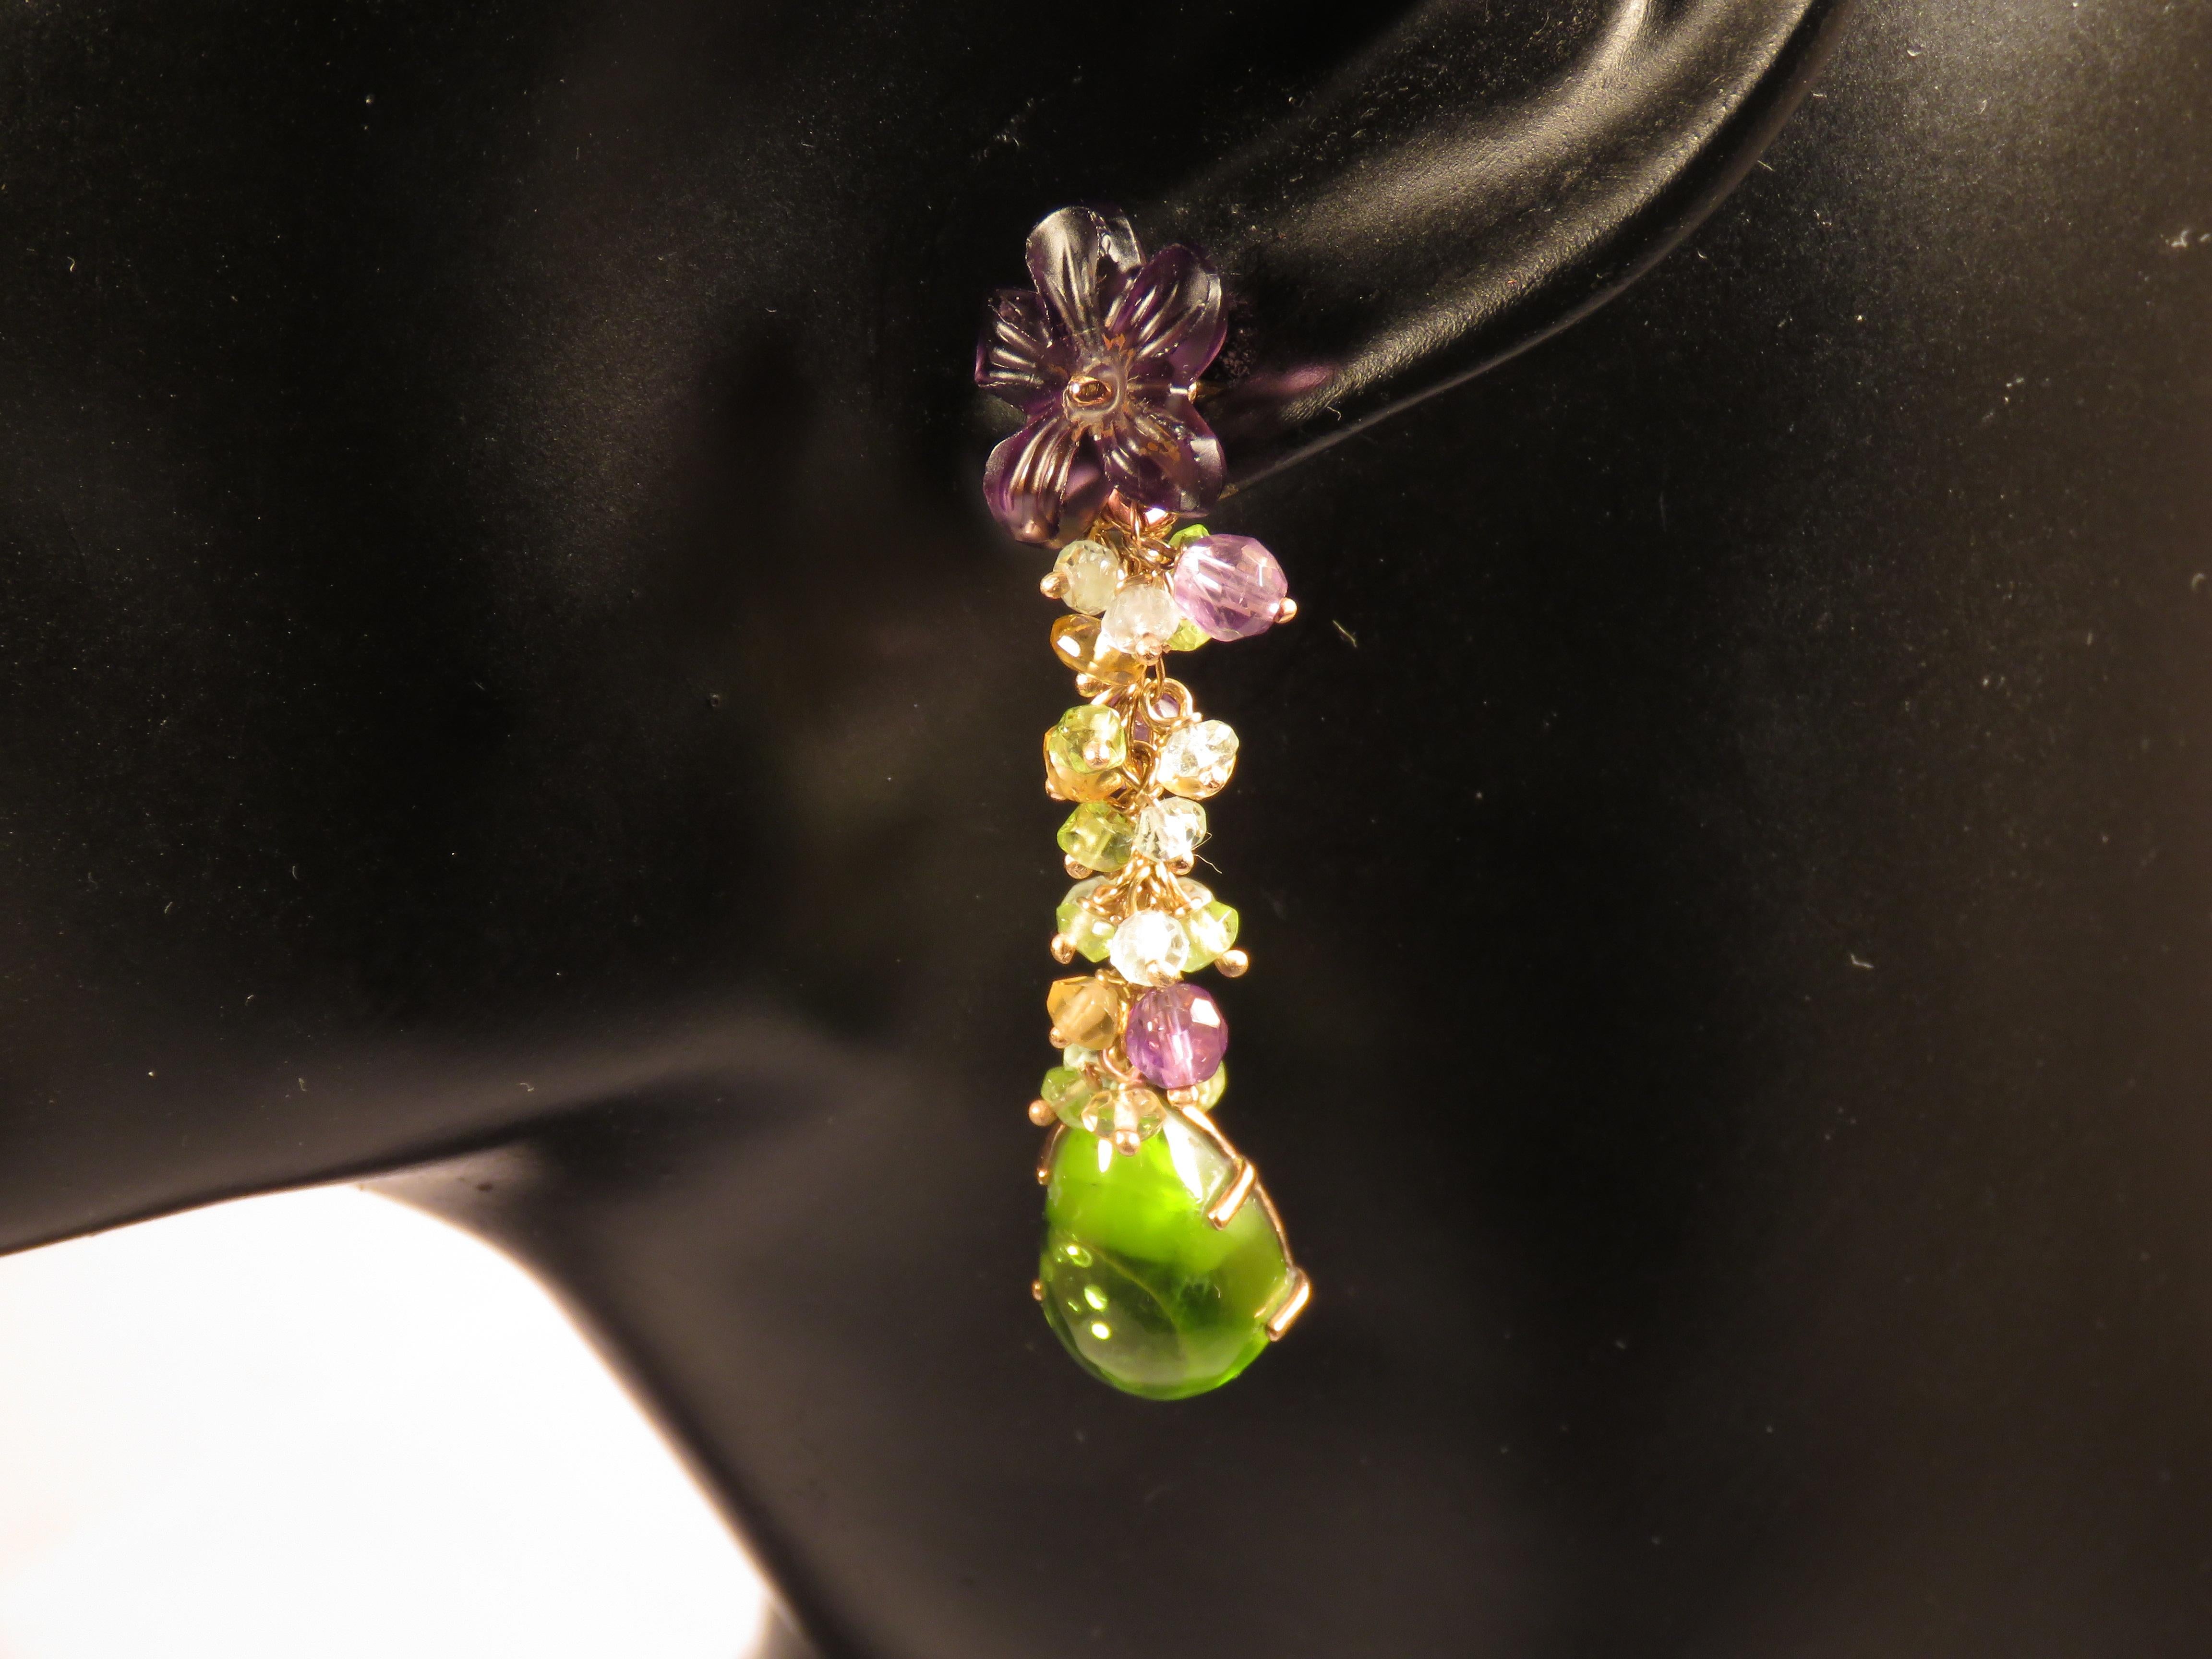 Beautiful earrings in 9 karat rose gold with 2 drops of natural peridot, 2 flowers of natural amethyst and aquamarine, amethyst and topaz gemstones in ball cut. Total length of each earring is 55 millimeters / 2.165 inches. They are handcrafted in